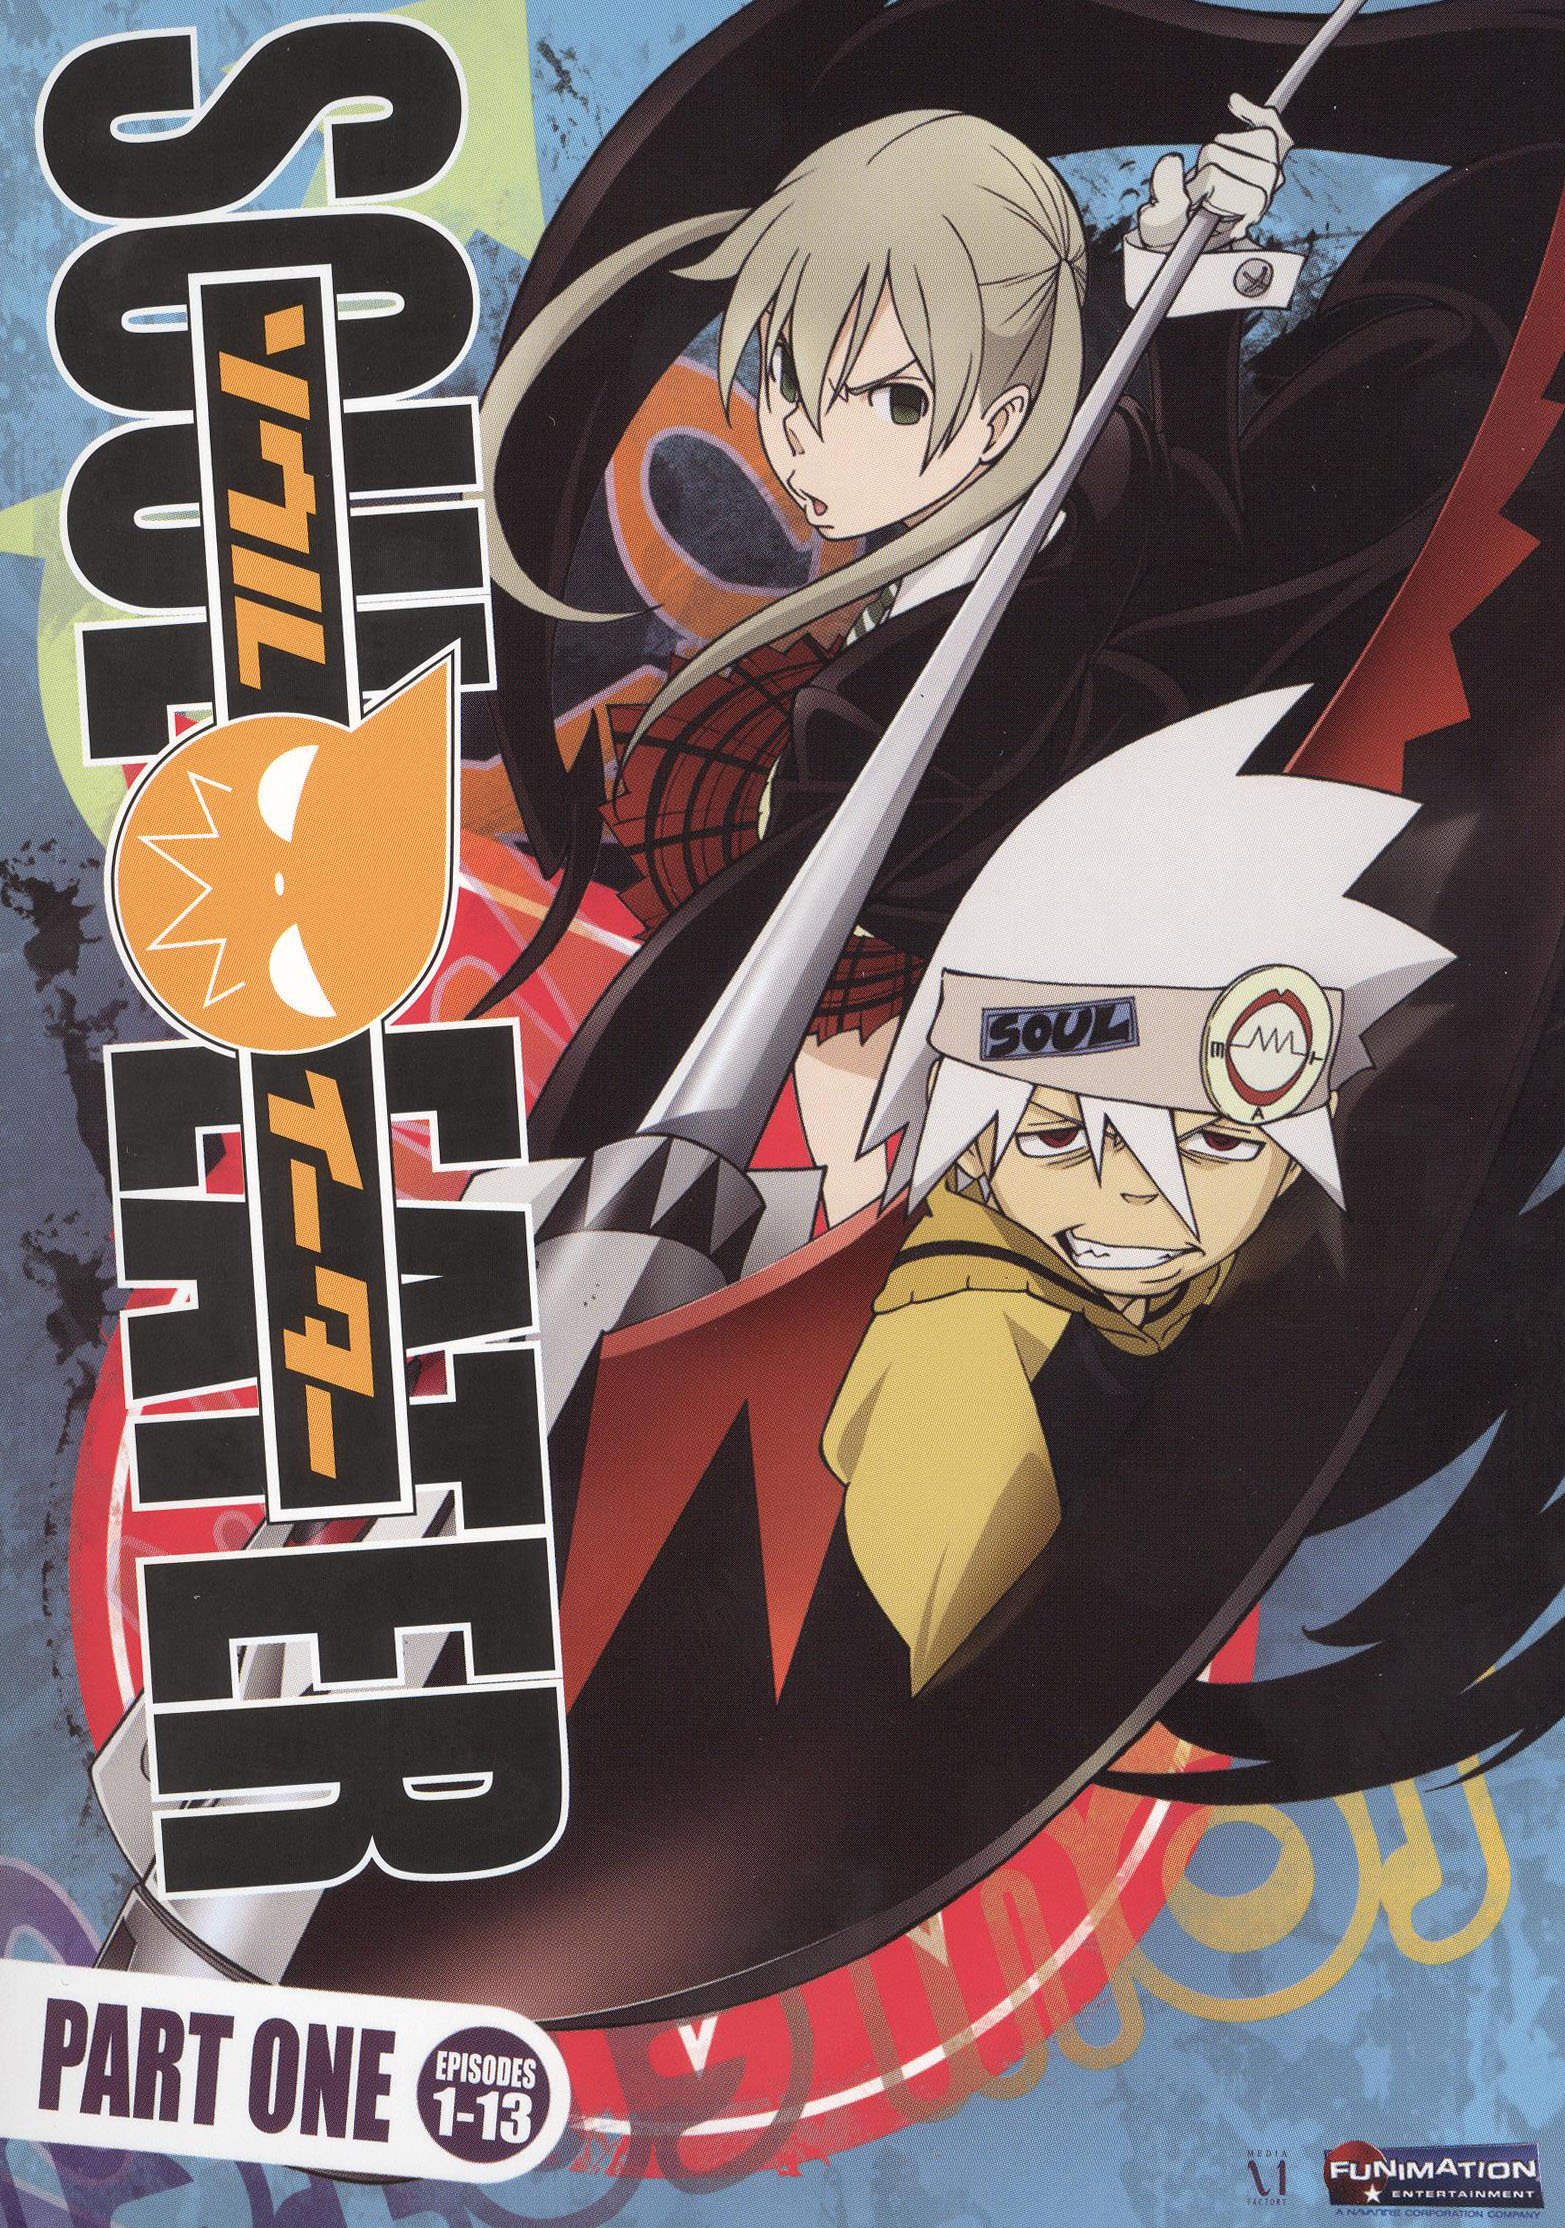  Soul Eater - The Complete Series [DVD] : Movies & TV